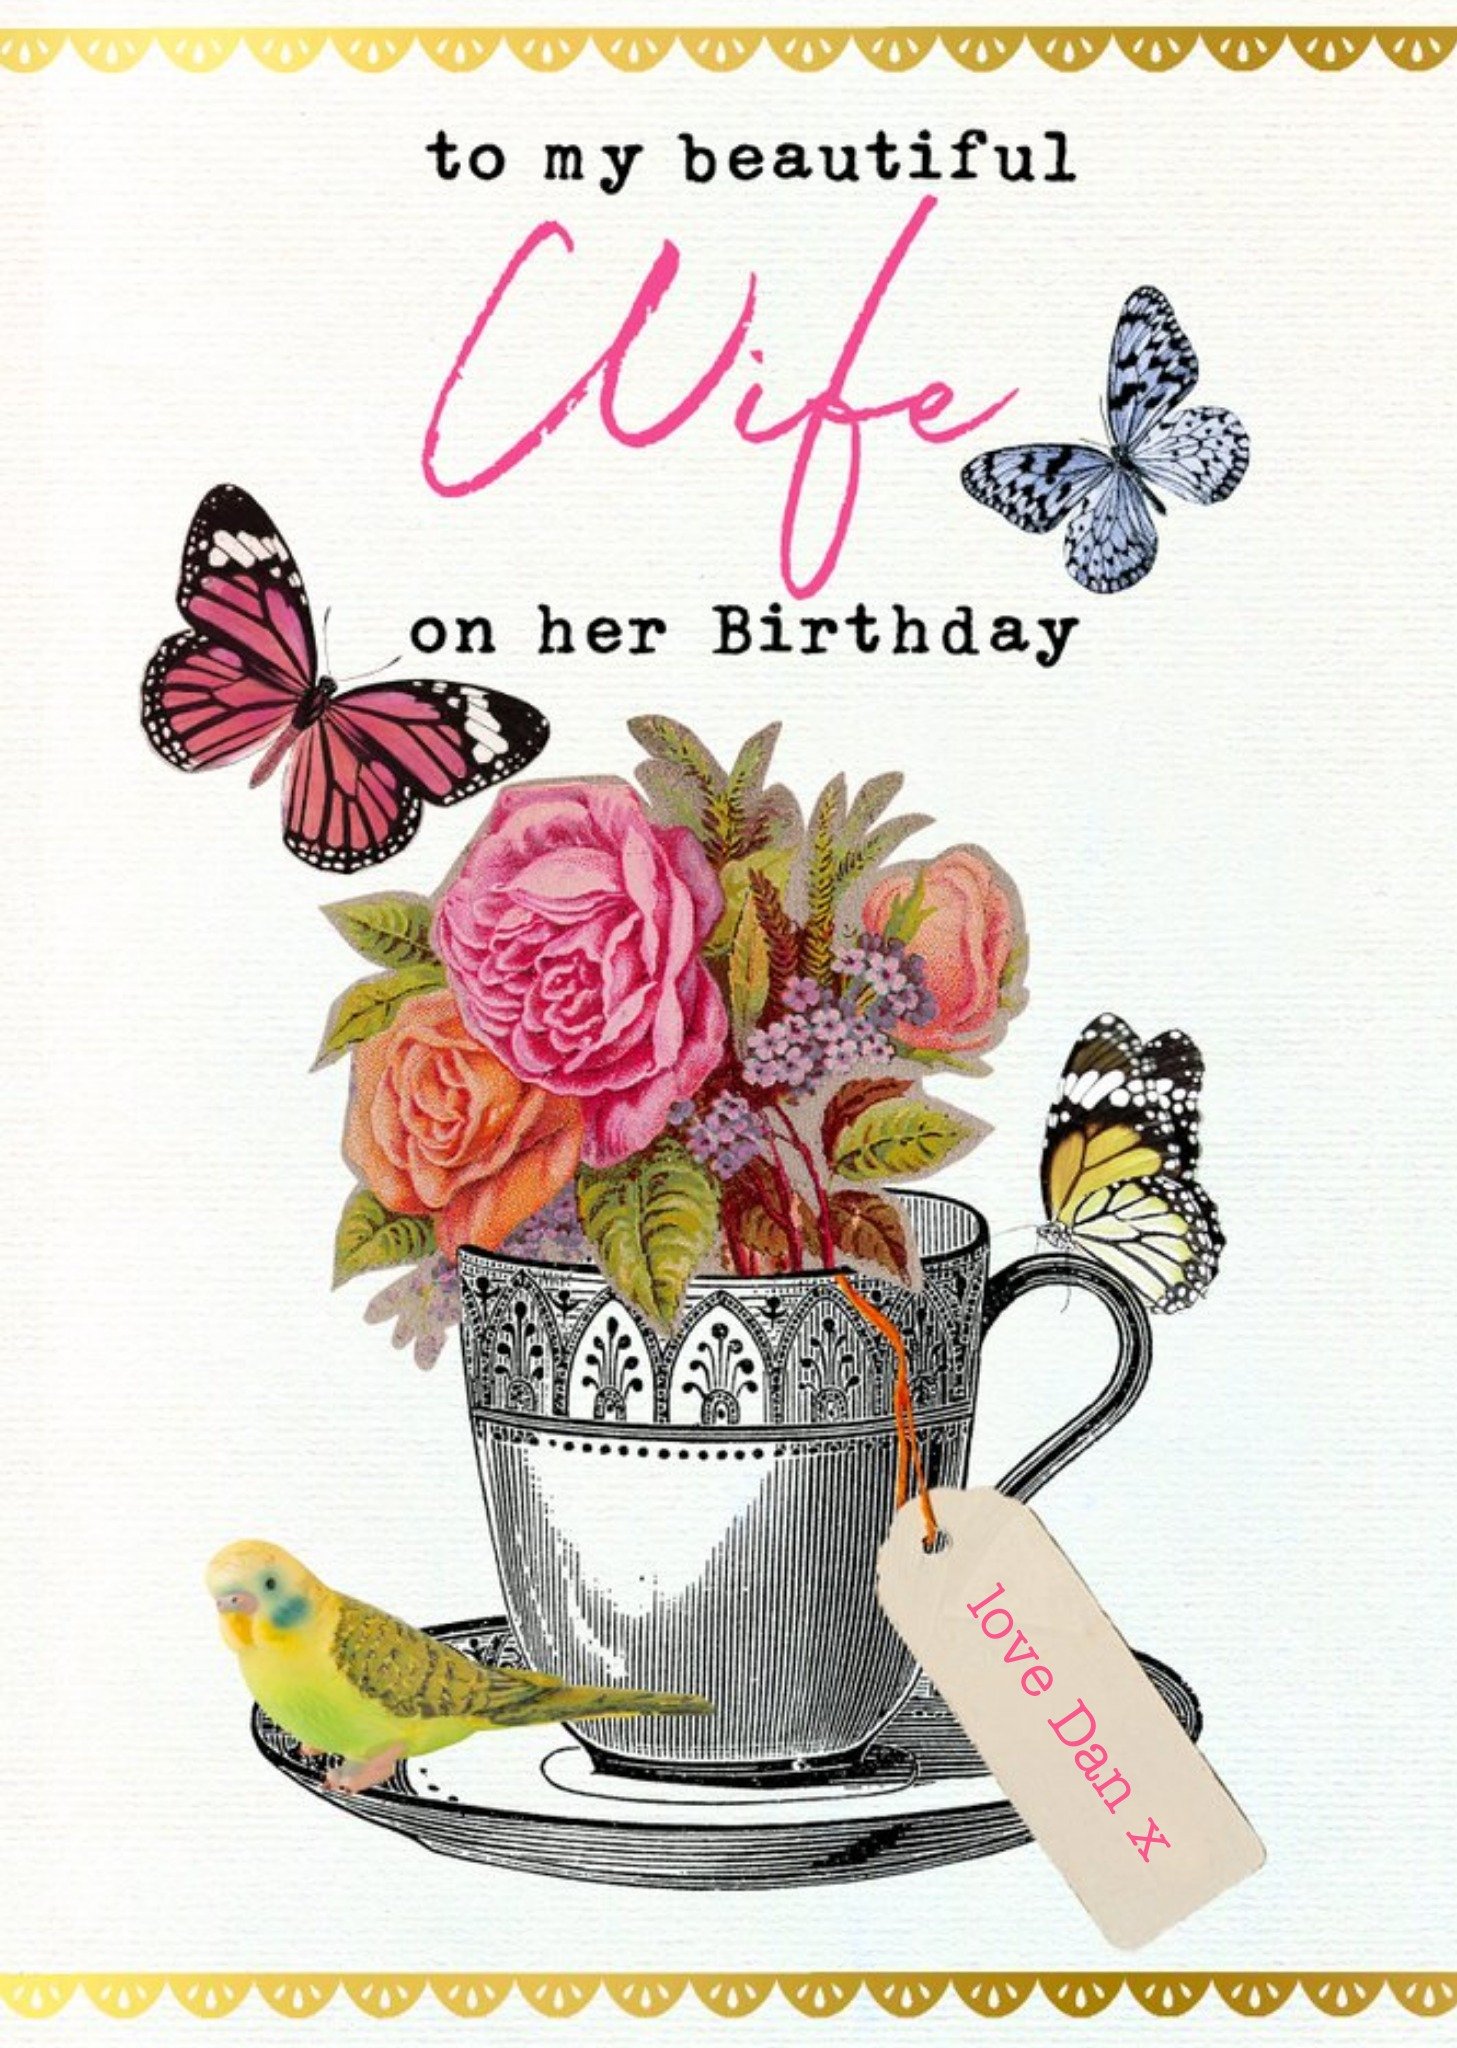 Moonpig Vintage Flowers Butterflies Traditional Happy Birthday Card For My Beautiful Wife, Large